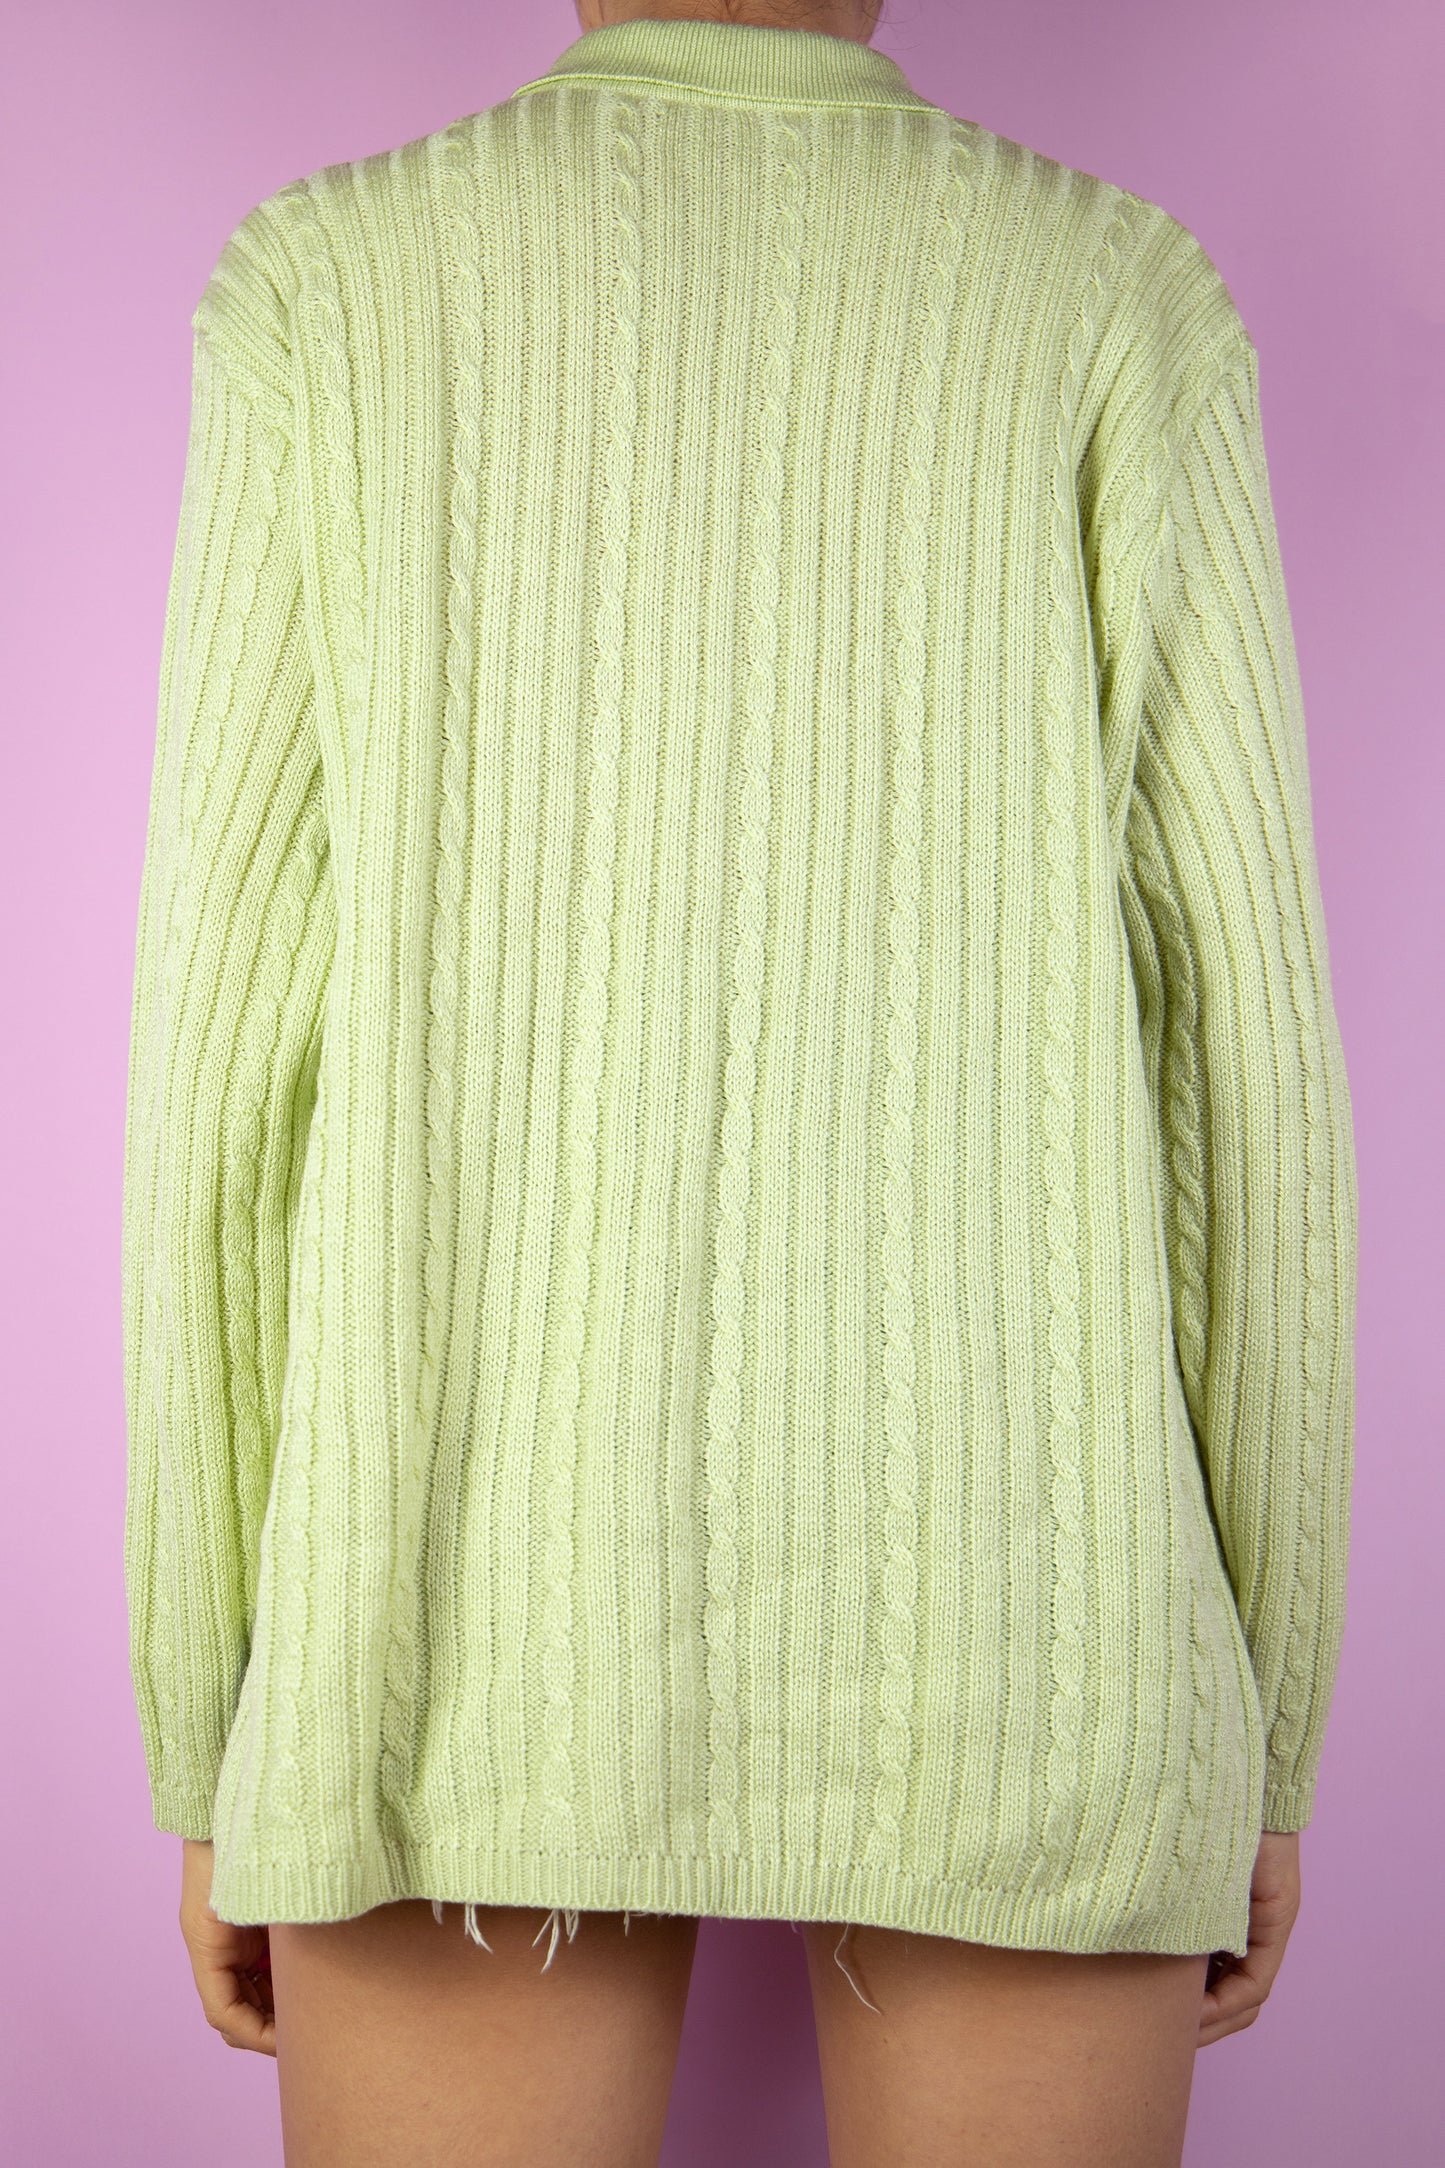 Vintage 90s Green Collar Knit Sweater - XL